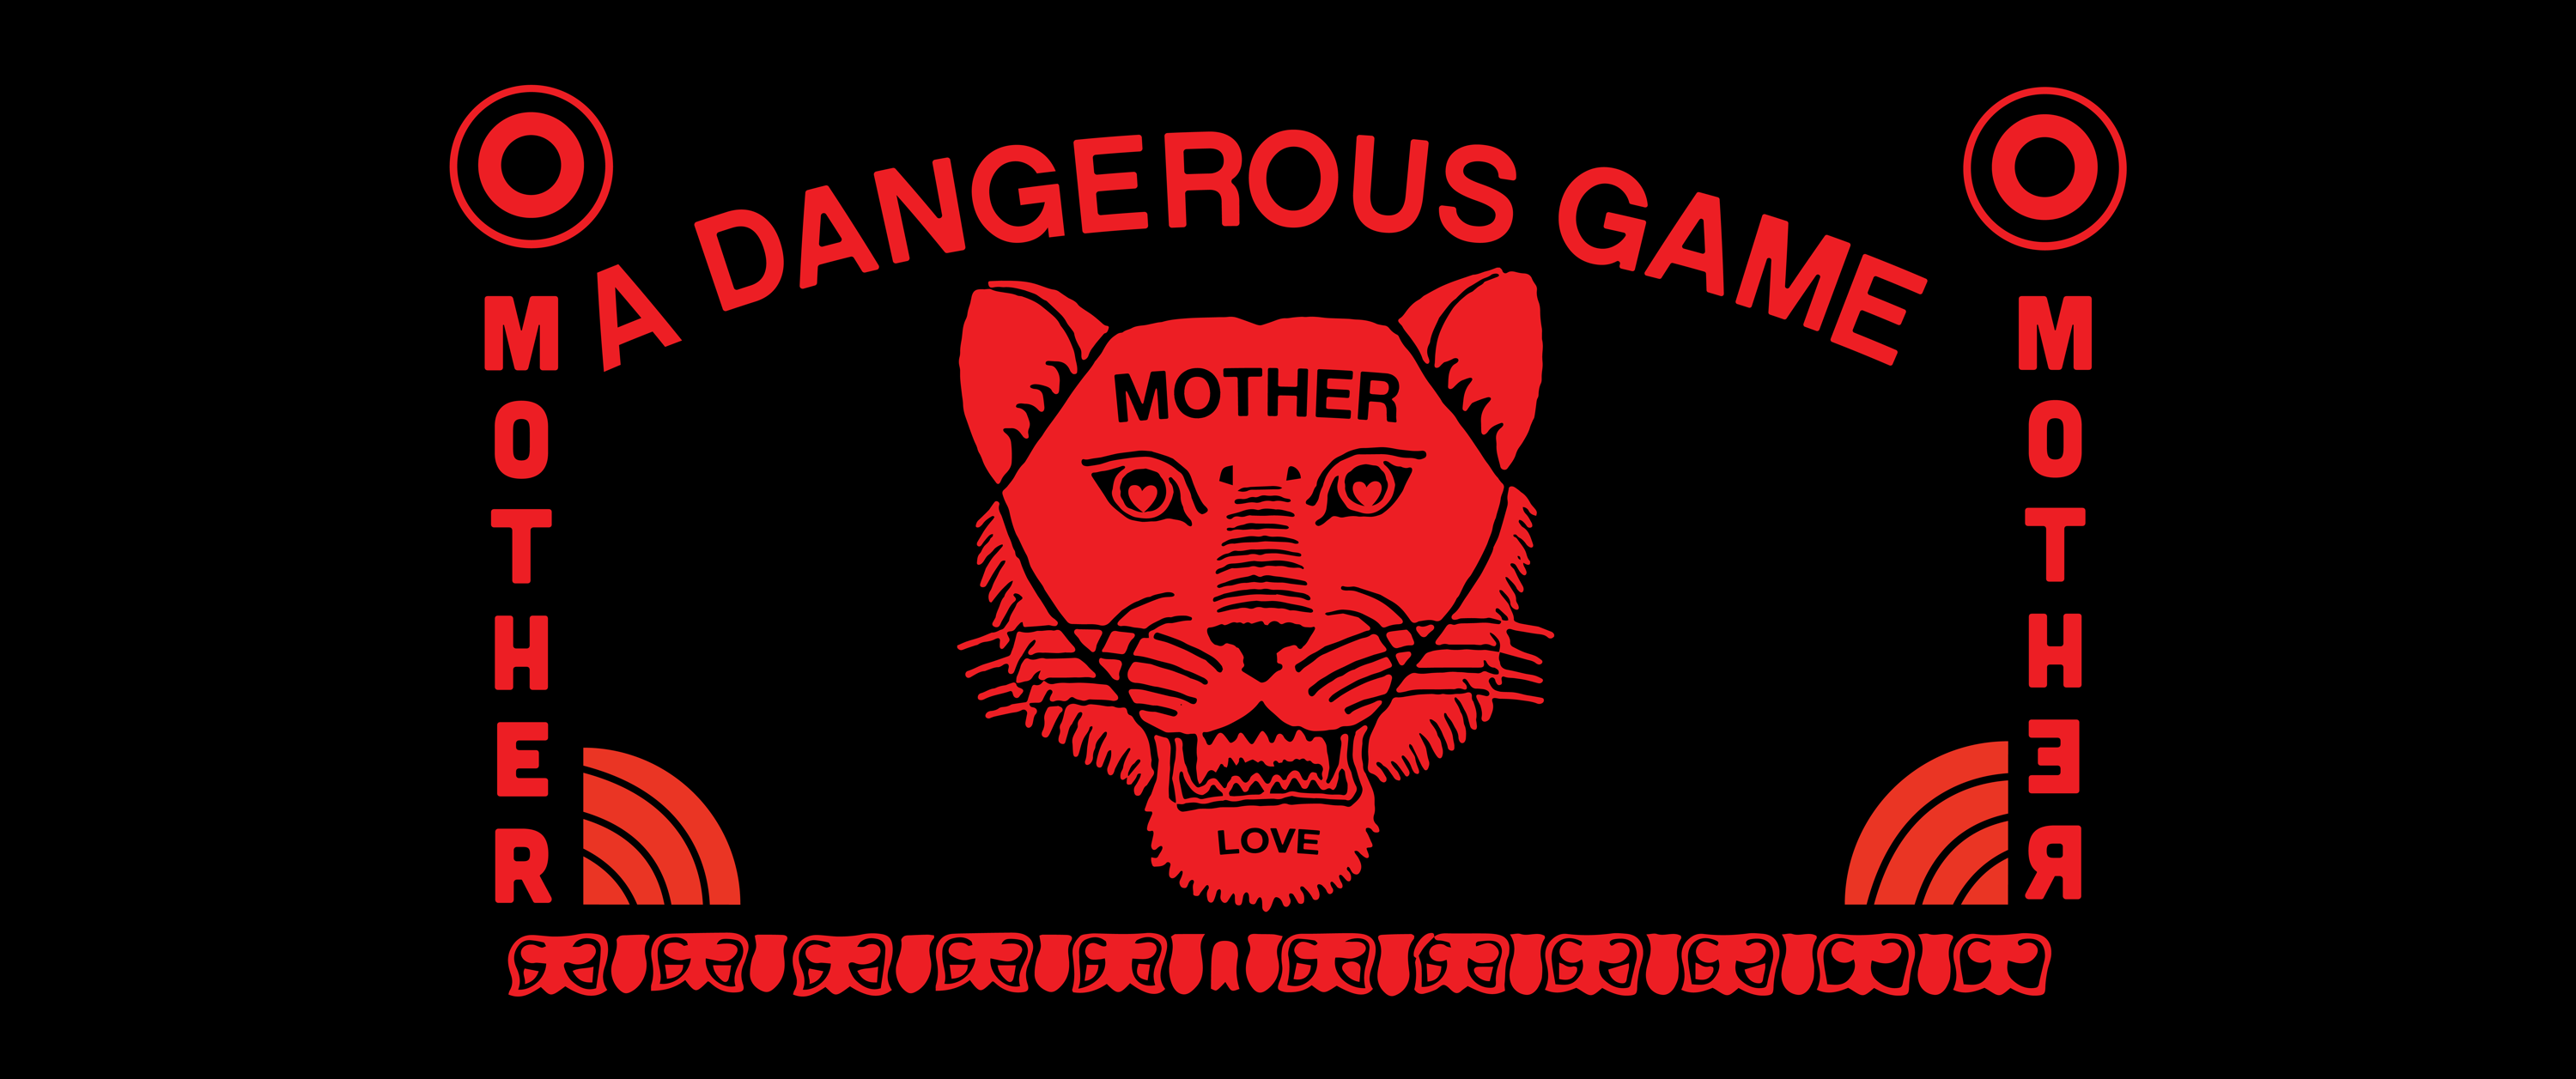 A Dangerous Game Graphic